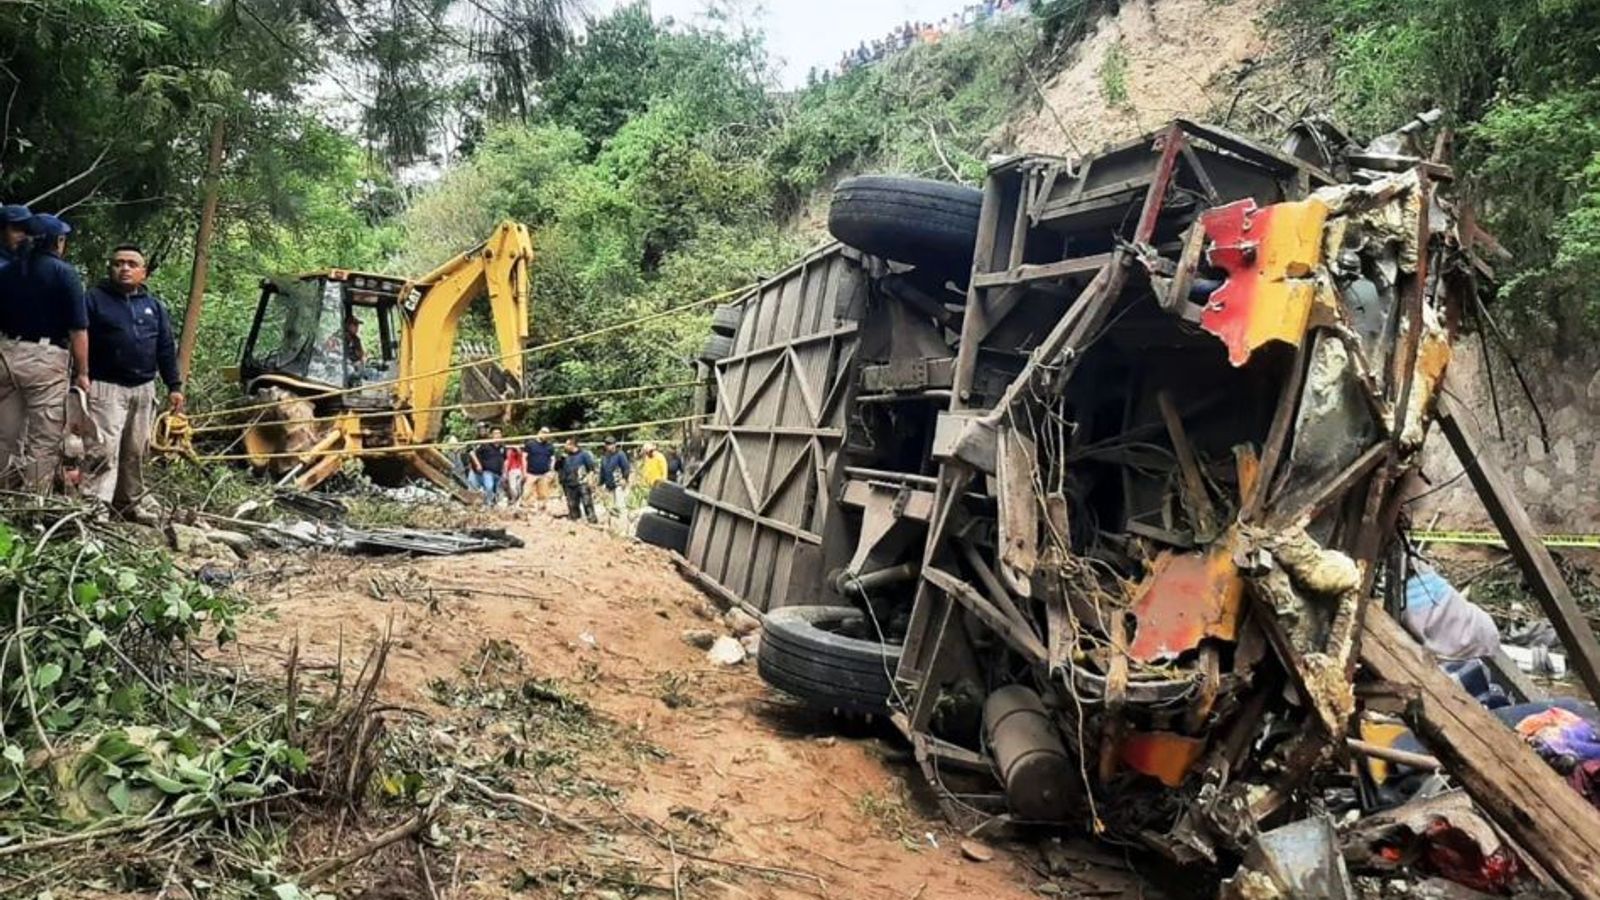 Toddler among 29 people dead in Mexico bus crash 